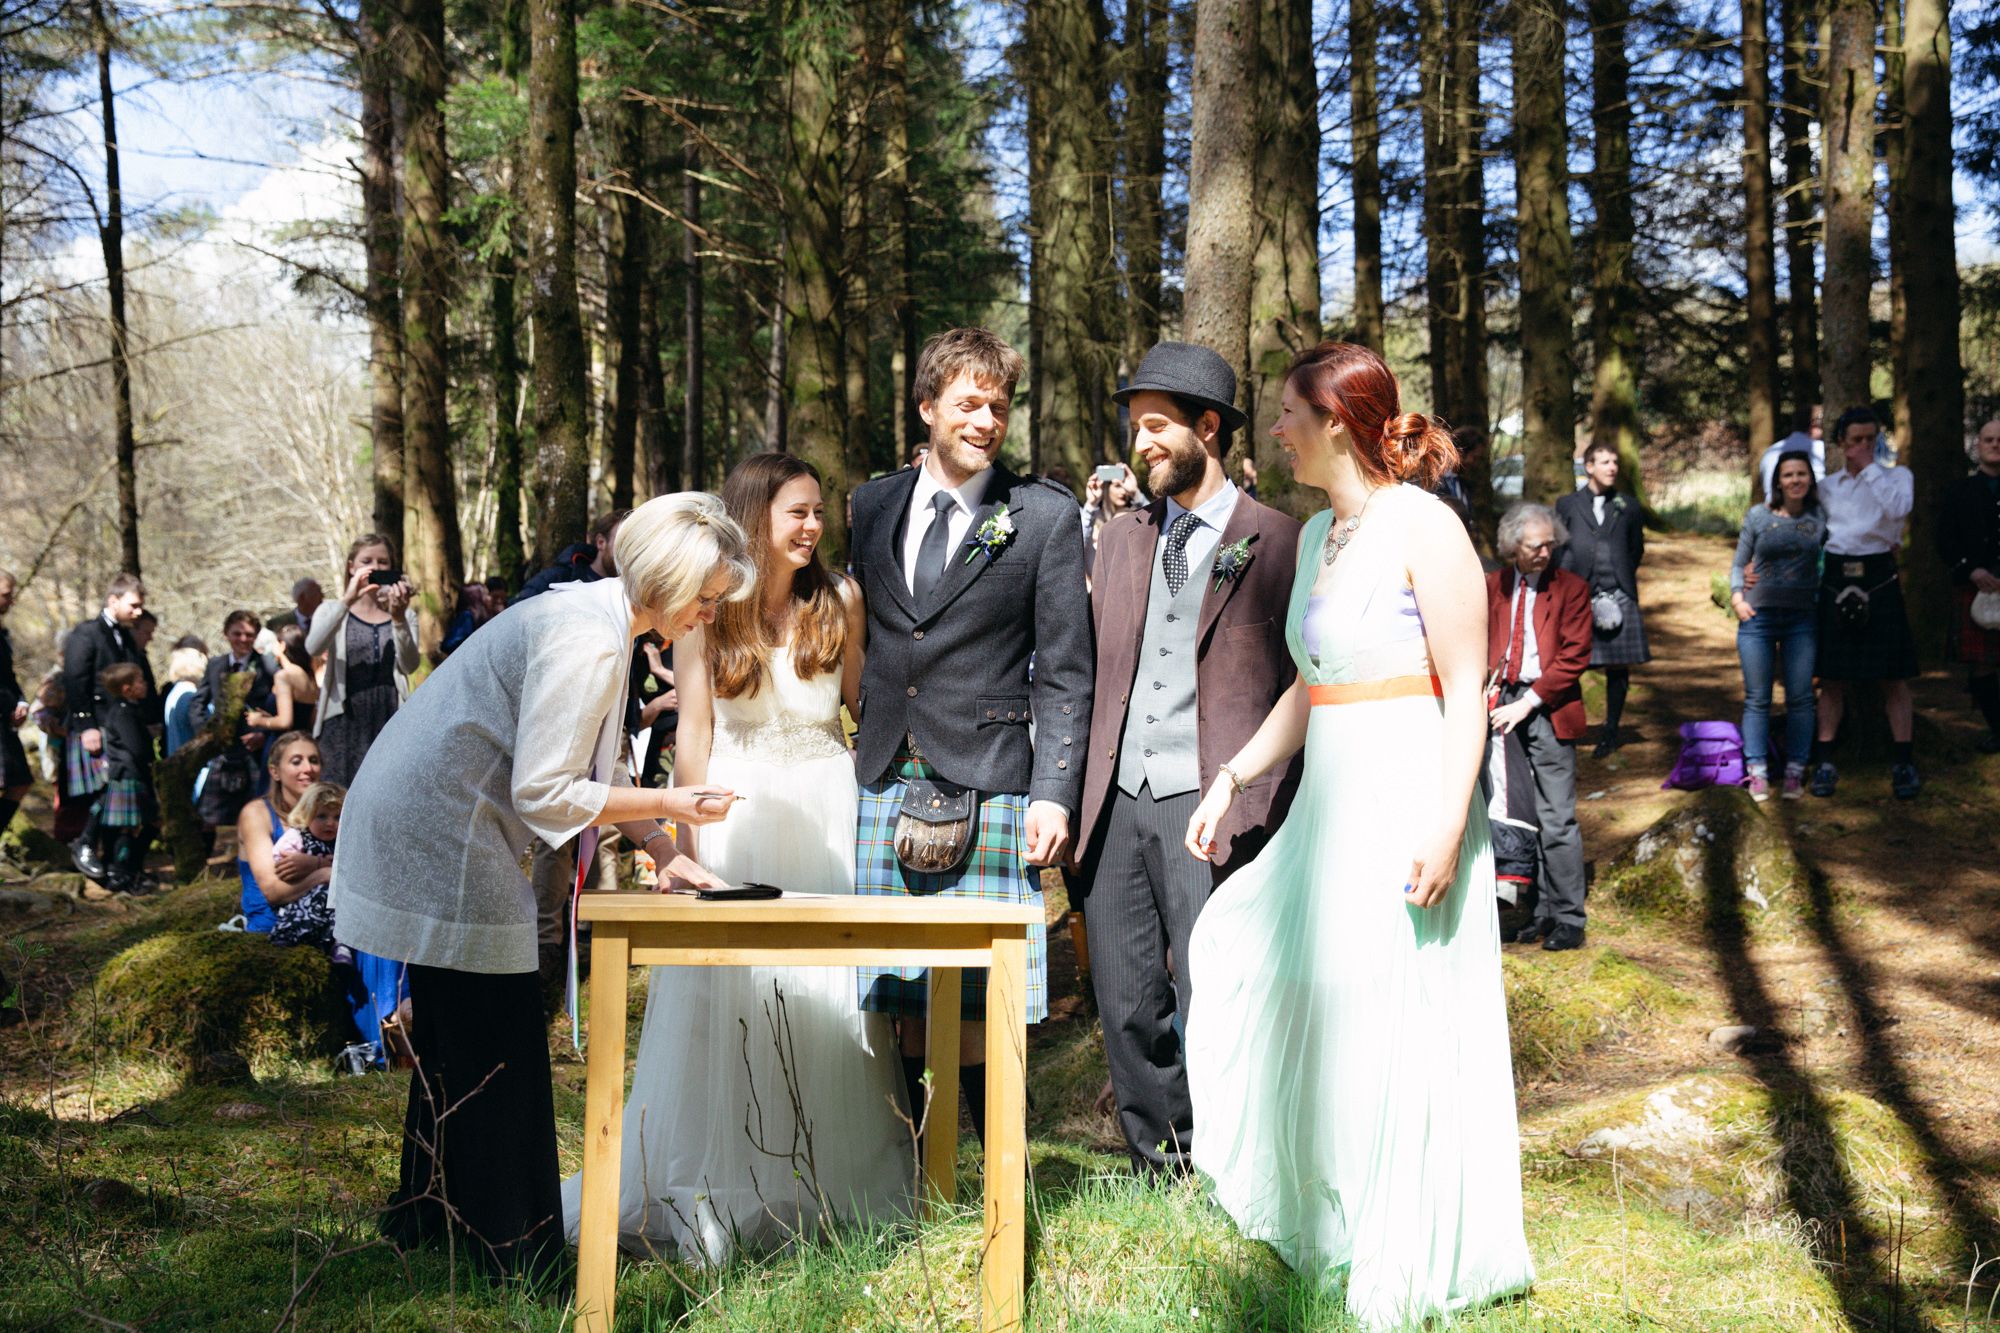 Wedding couple and witnesses at rustic forest wedding Scotland